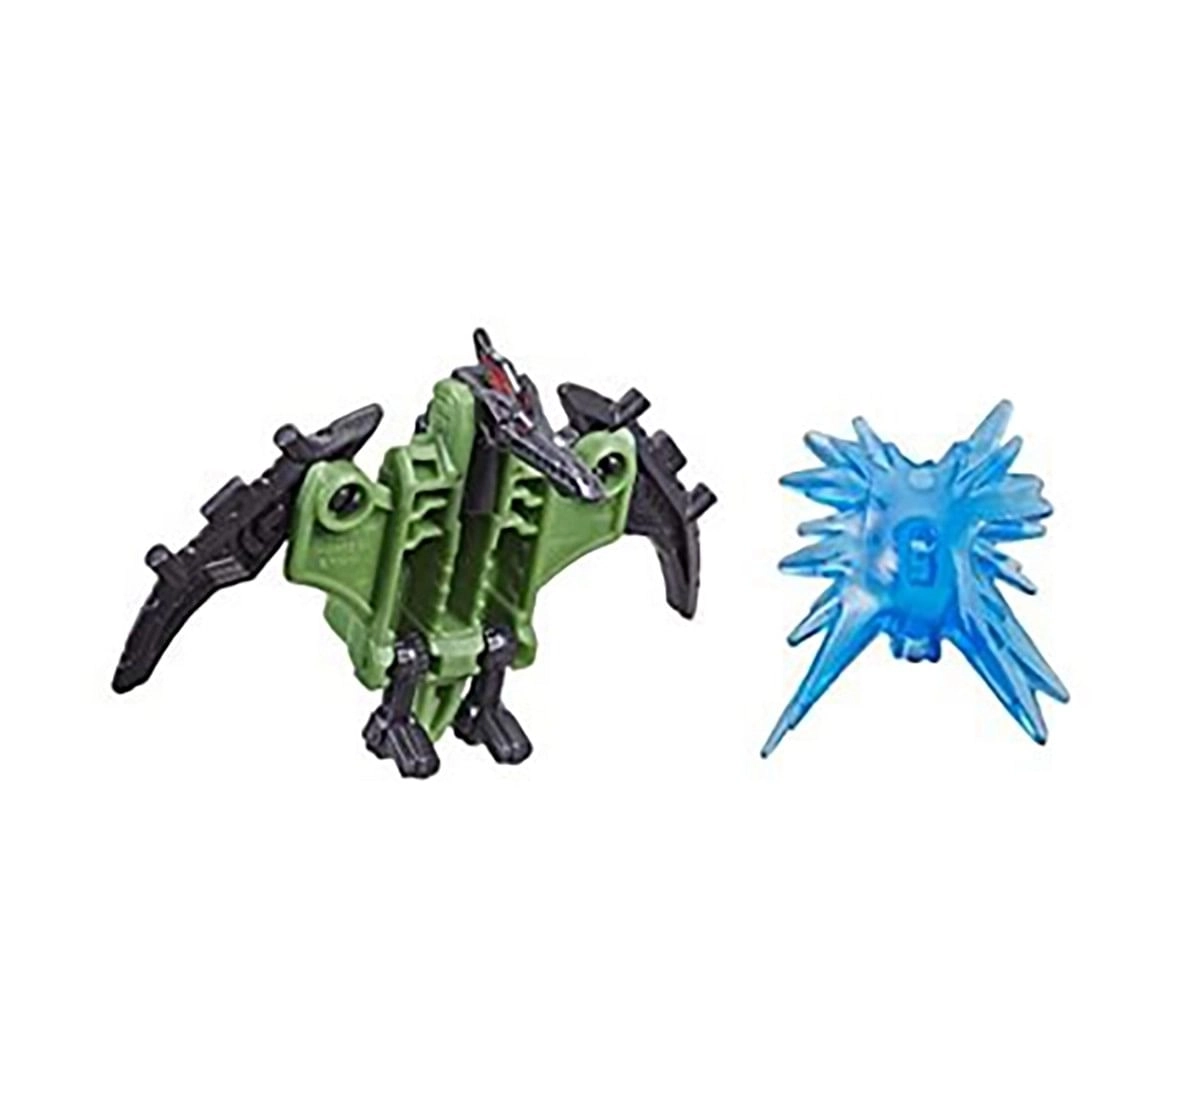 Transformers Action Figure 1.5-inch Assorted Action Figures for Kids age 8Y+ 